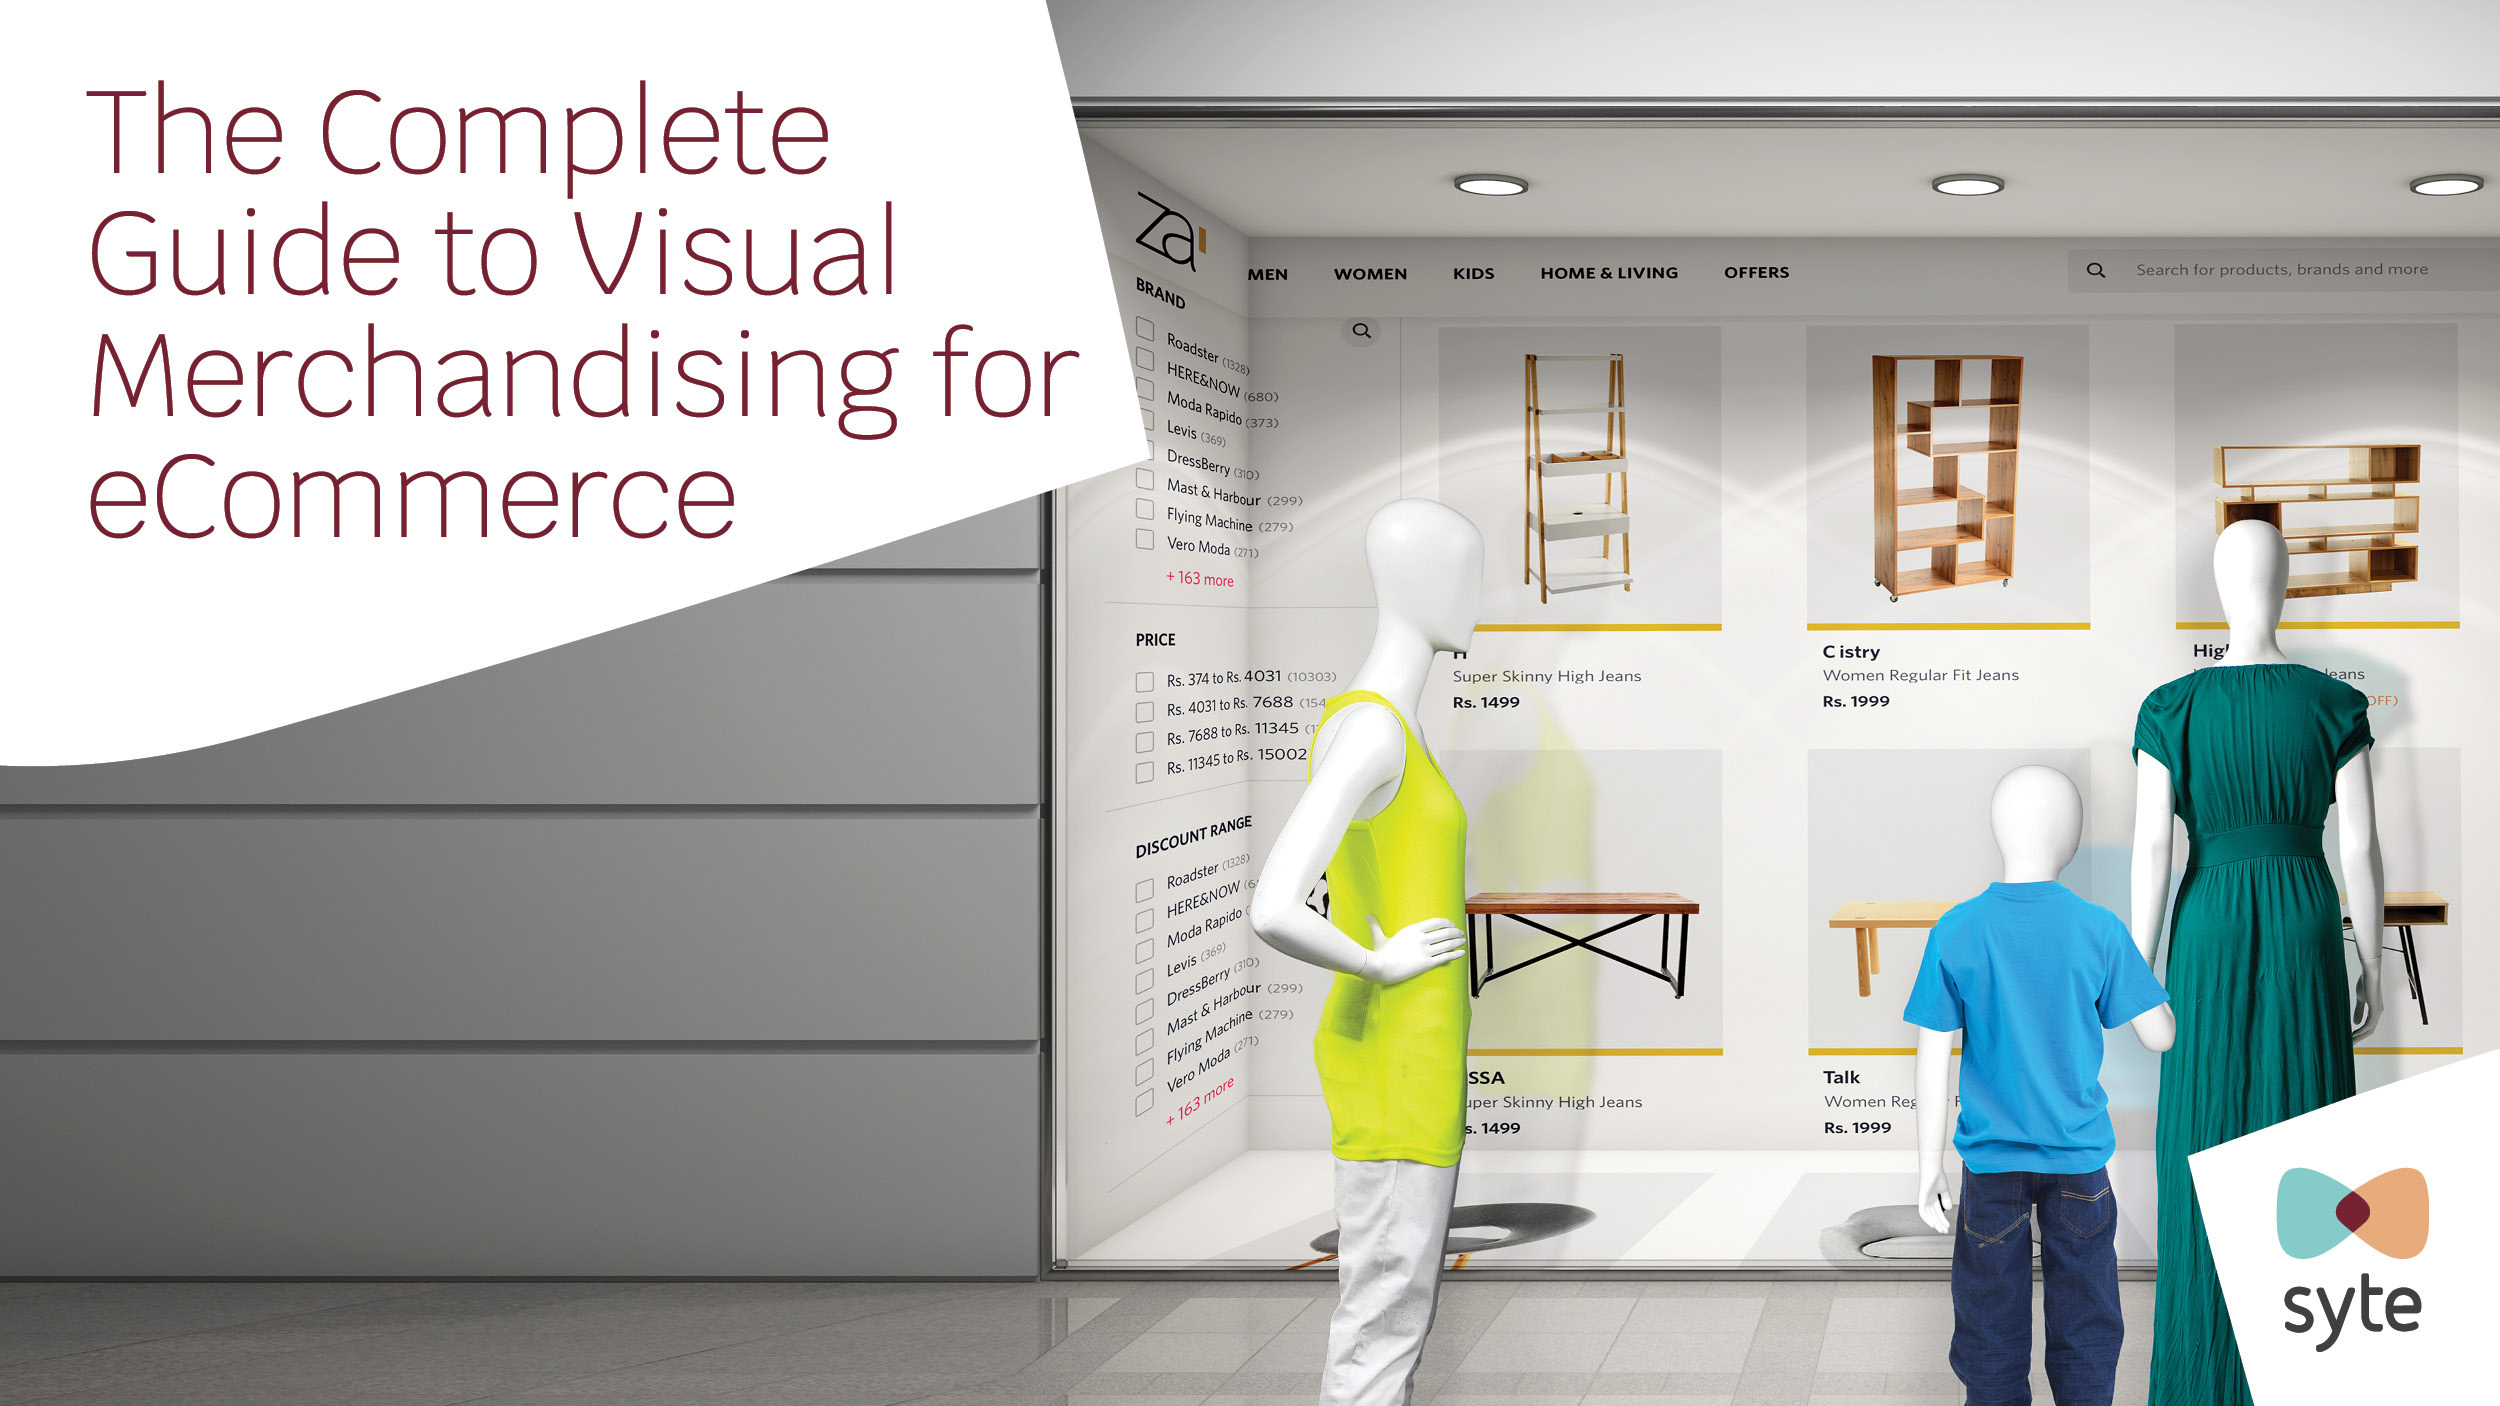 https://www.syte.ai/wp-content/uploads/2021/07/Guide-to-Visual-Merchandising_1200x675.jpg